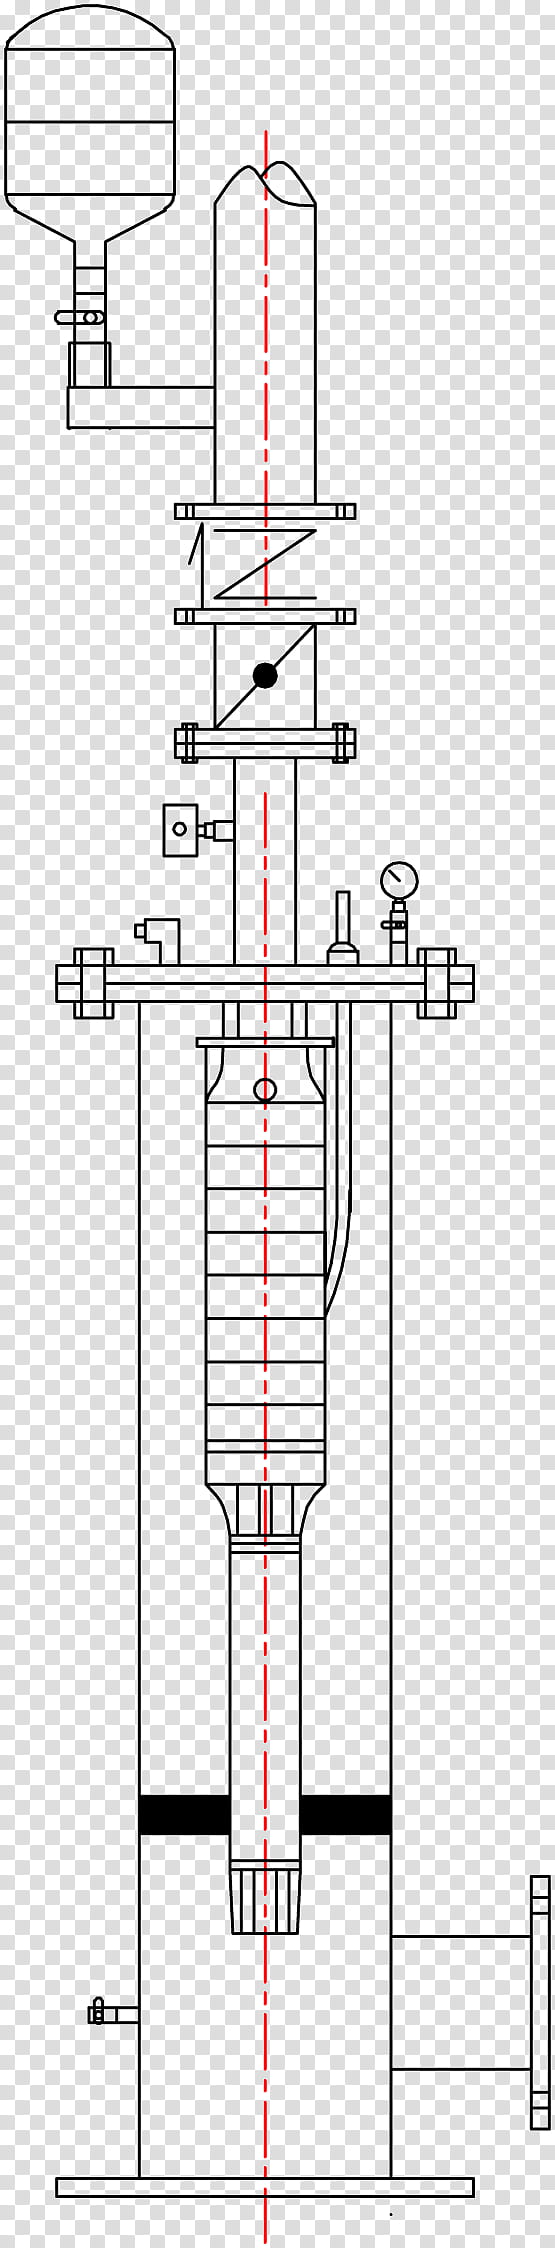 Water, Submersible Pump, Hardware Pumps, dwg, Computeraided Design, Technical Drawing, Centrifugal Pump, Well transparent background PNG clipart